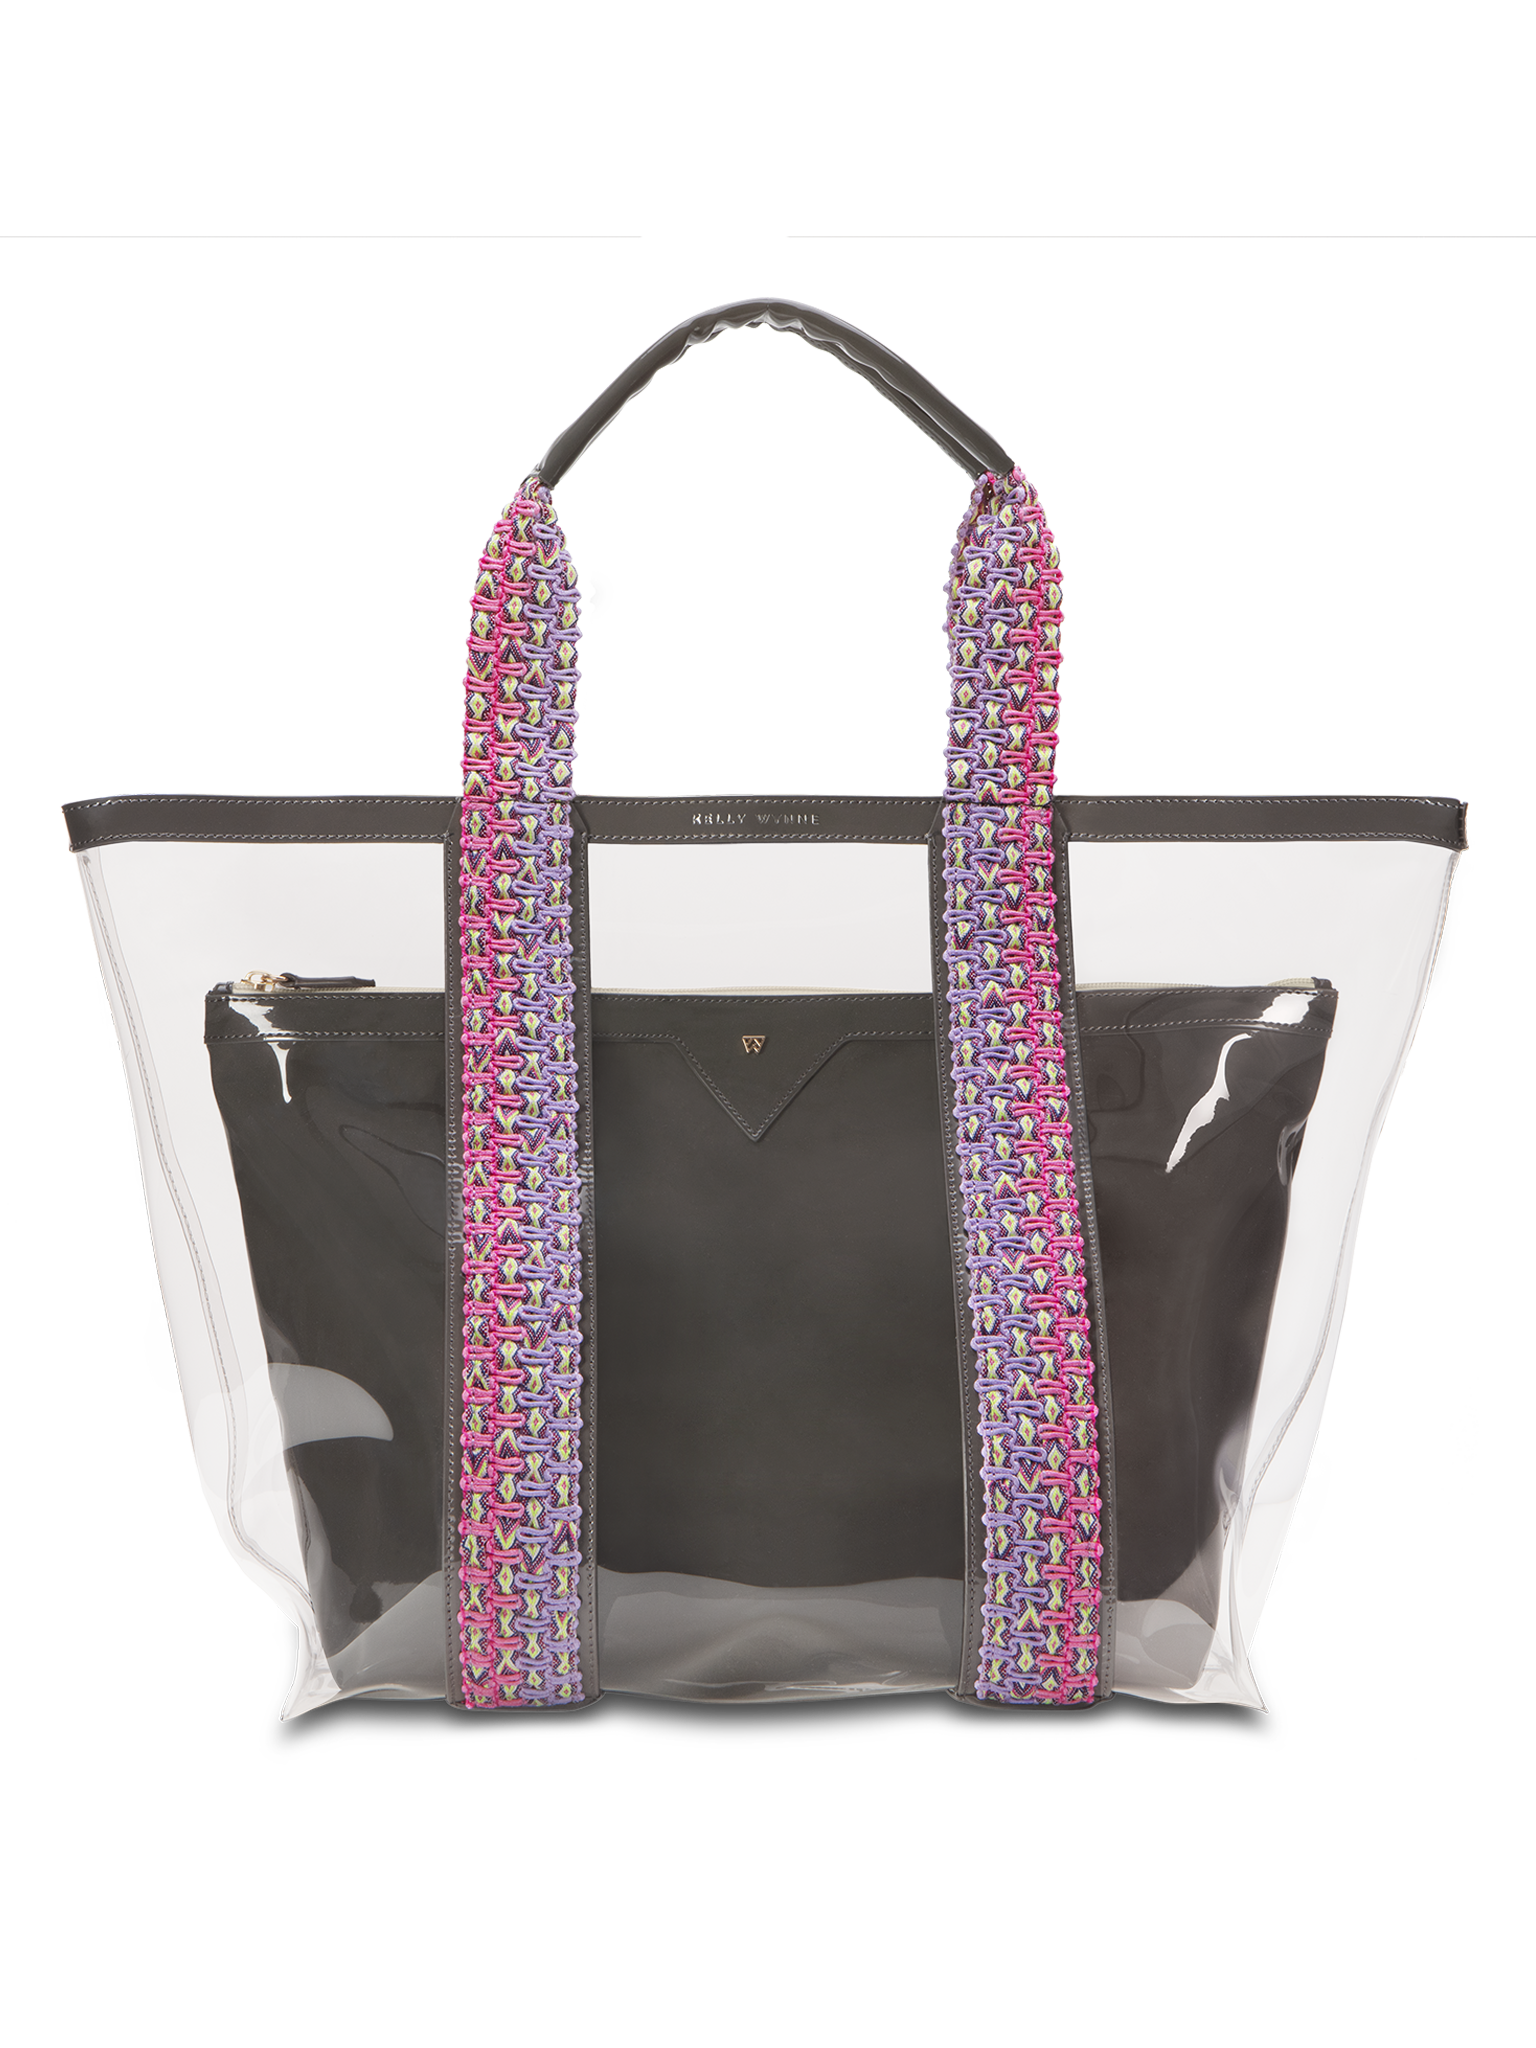 Water resistant, high-quality beach bag. Exterior tote in clear, interior patent leather pouch in black 